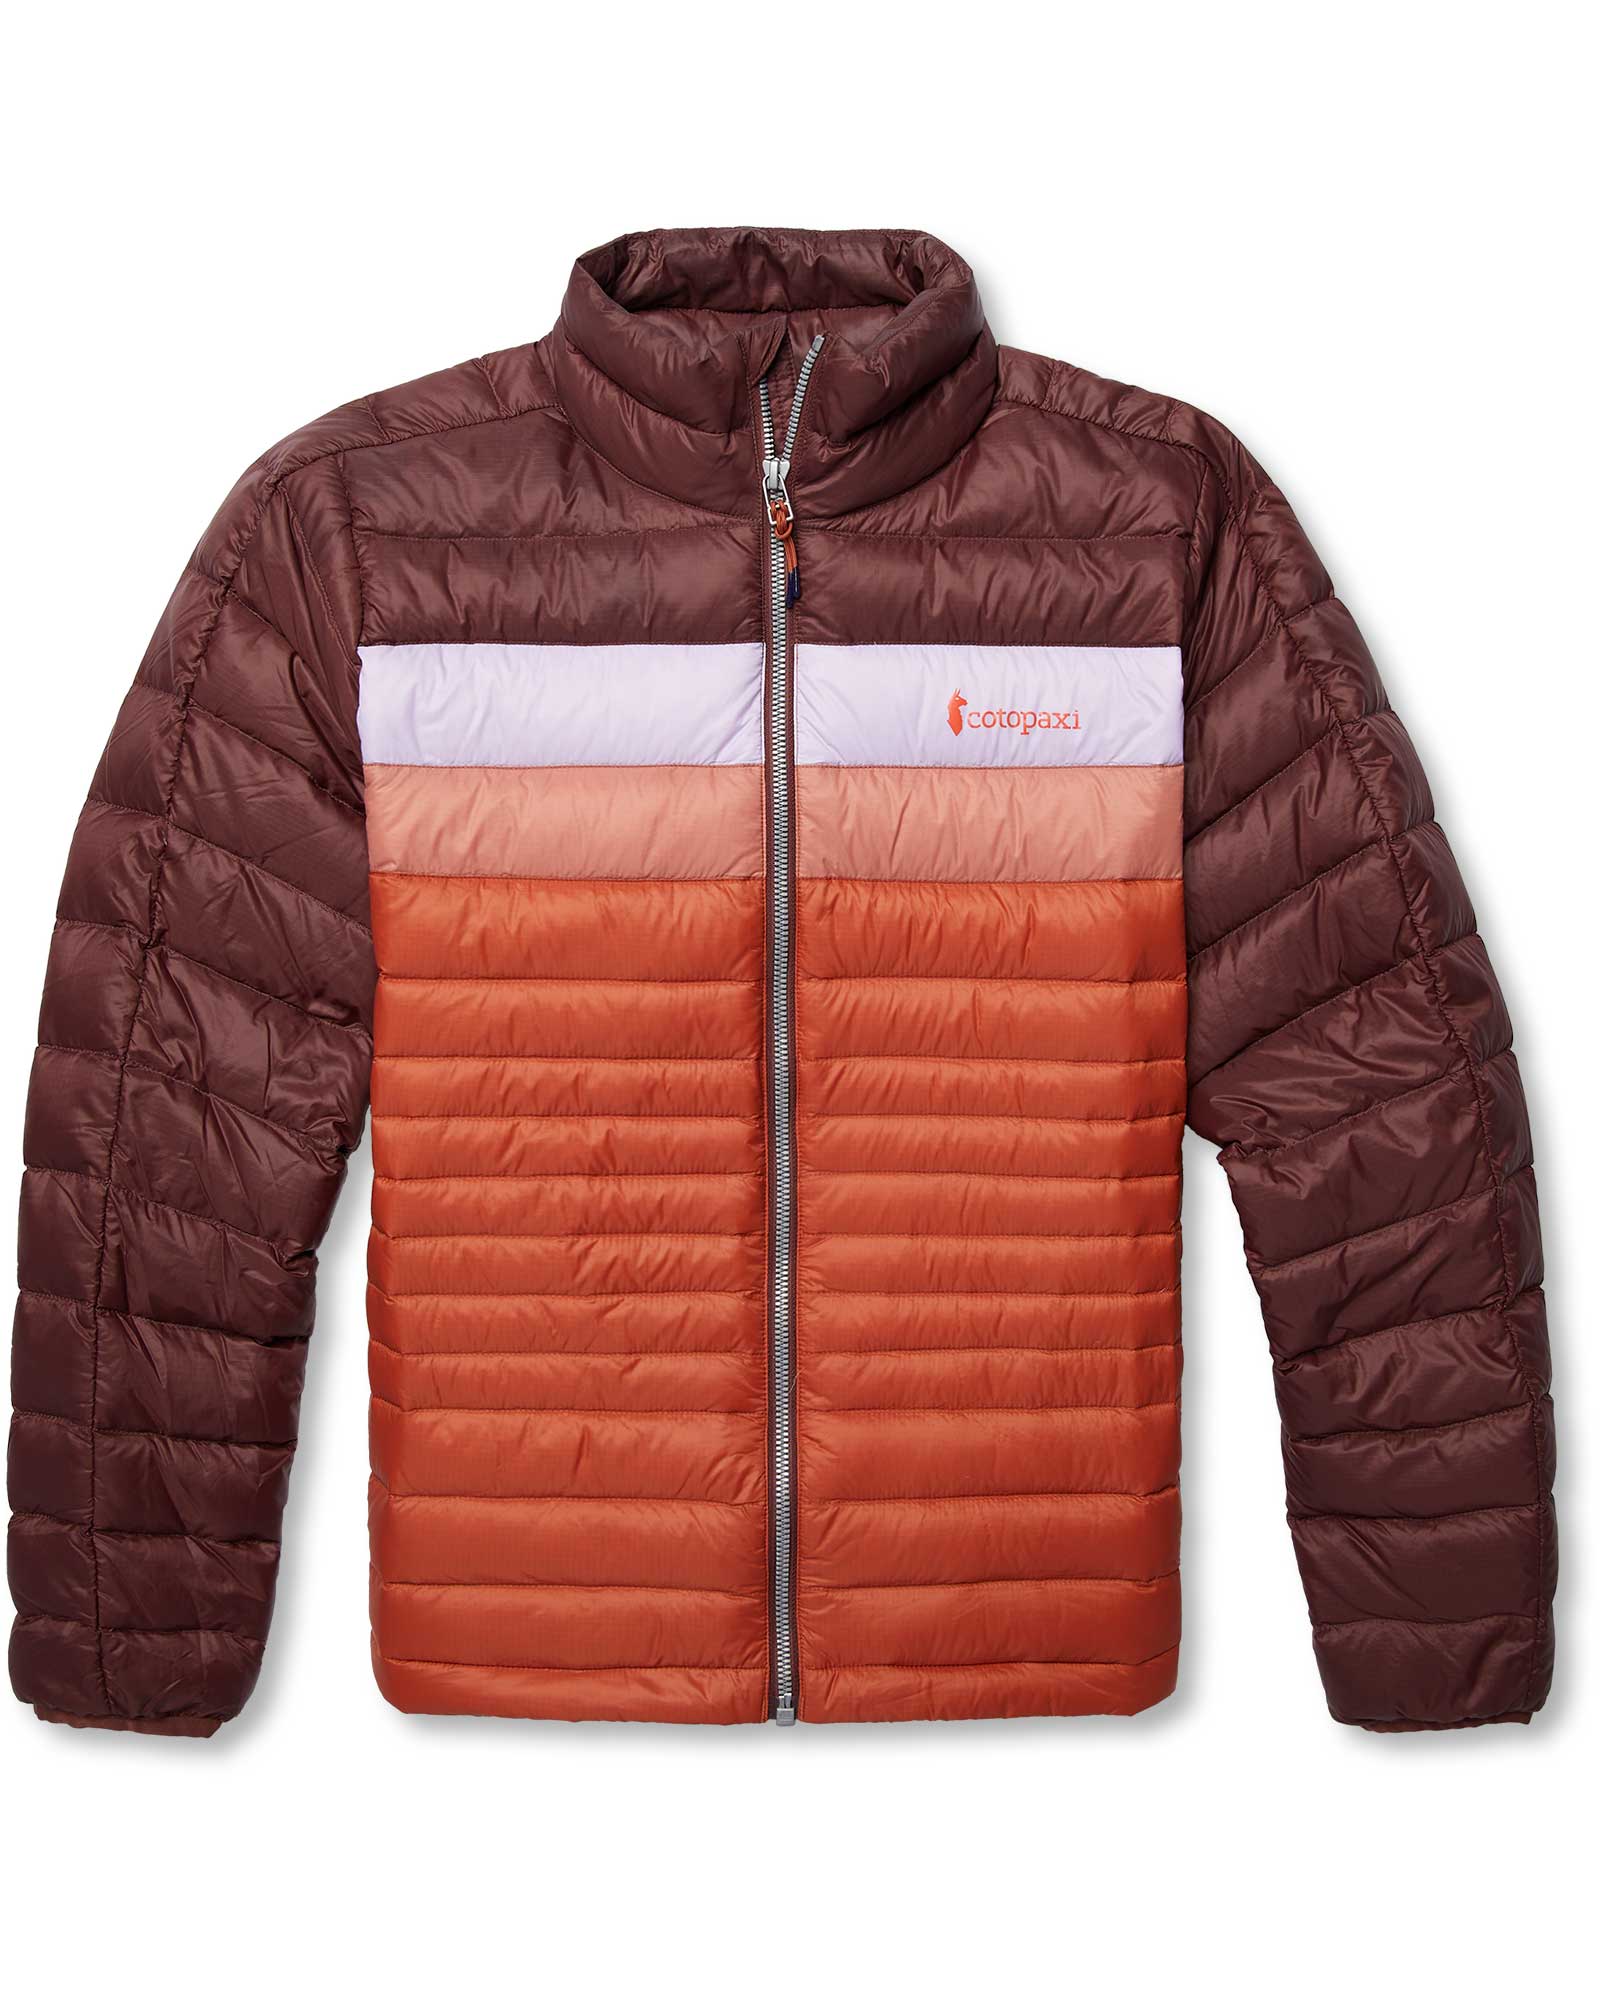 Product image of Cotopaxi Fuego Women's Down Jacket